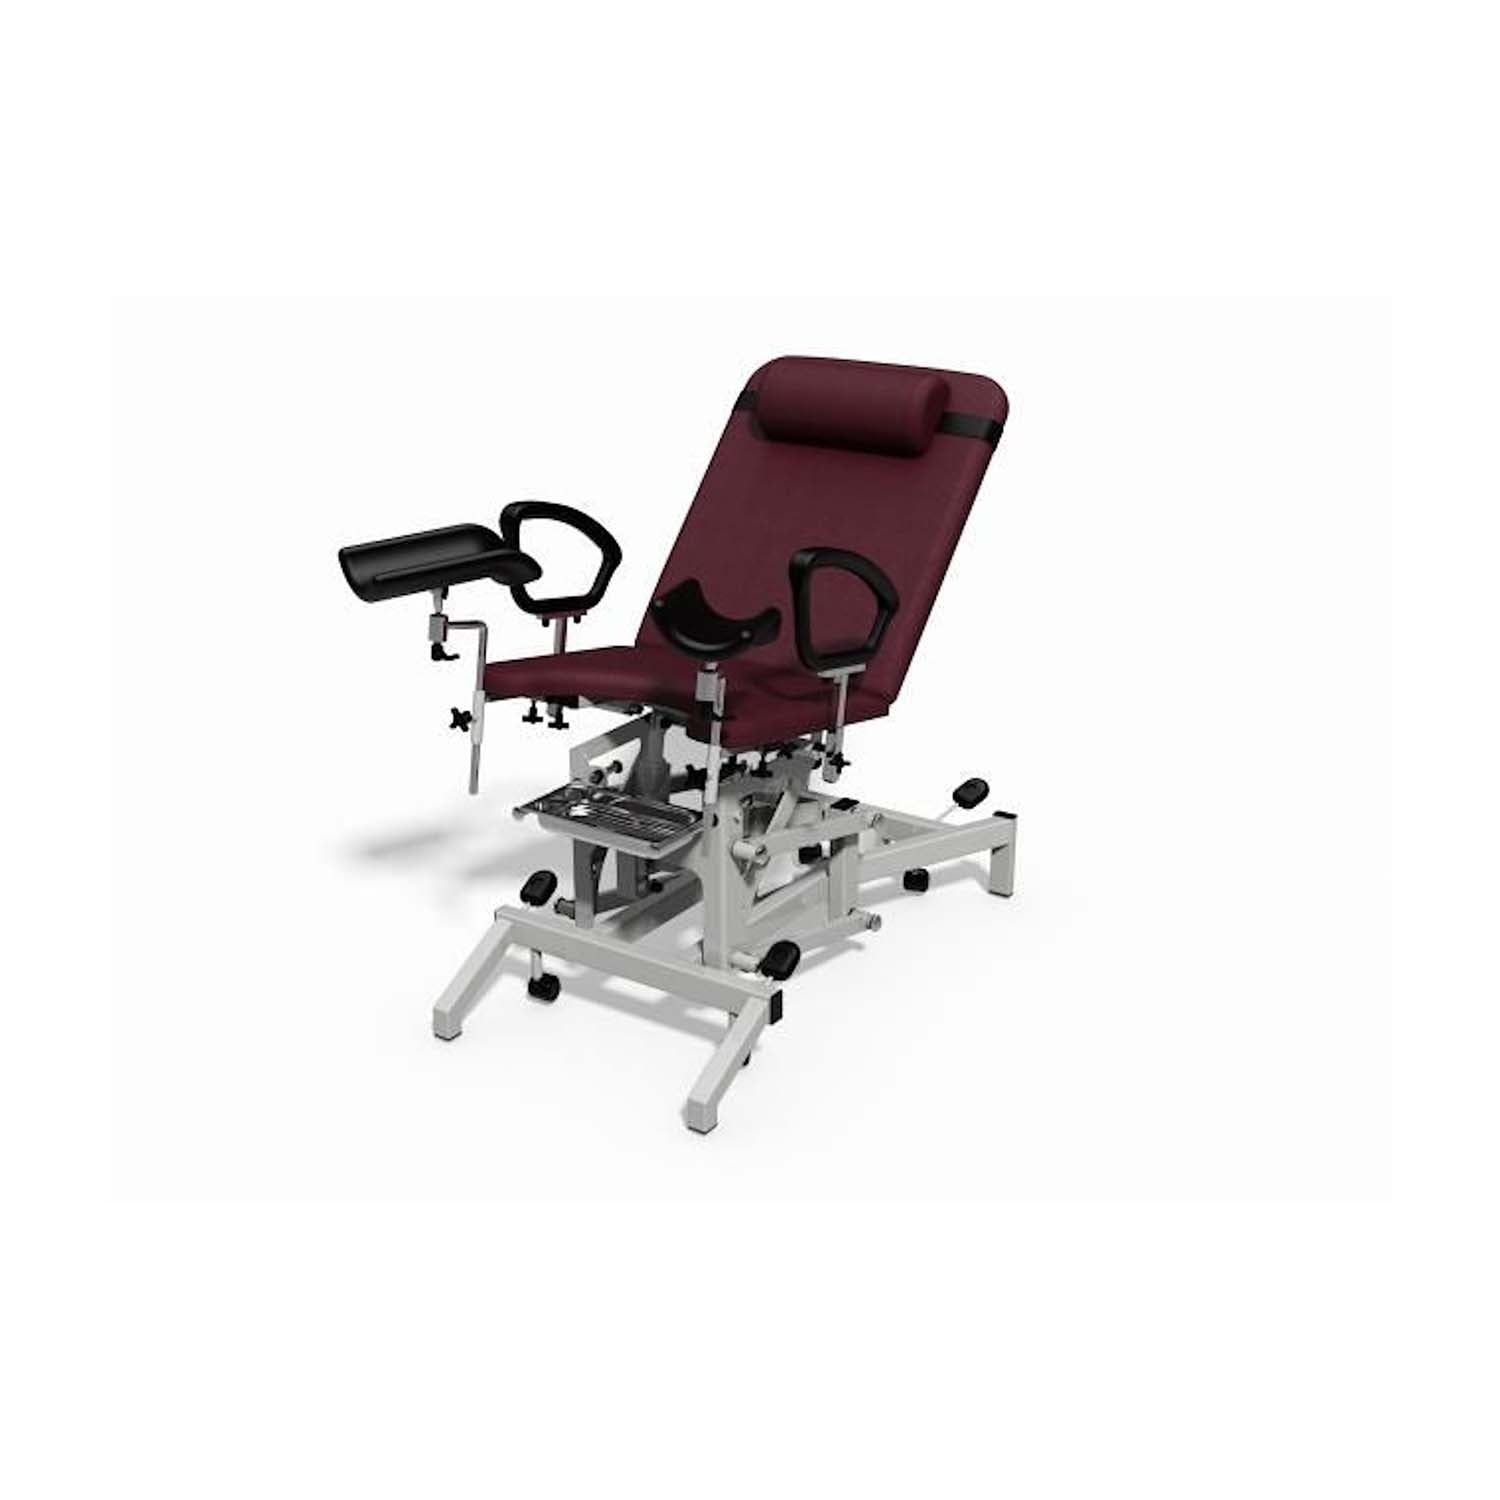 Plinth 2000 Model 93G Gynaecology Chair 1 Motor | Mulled Wine